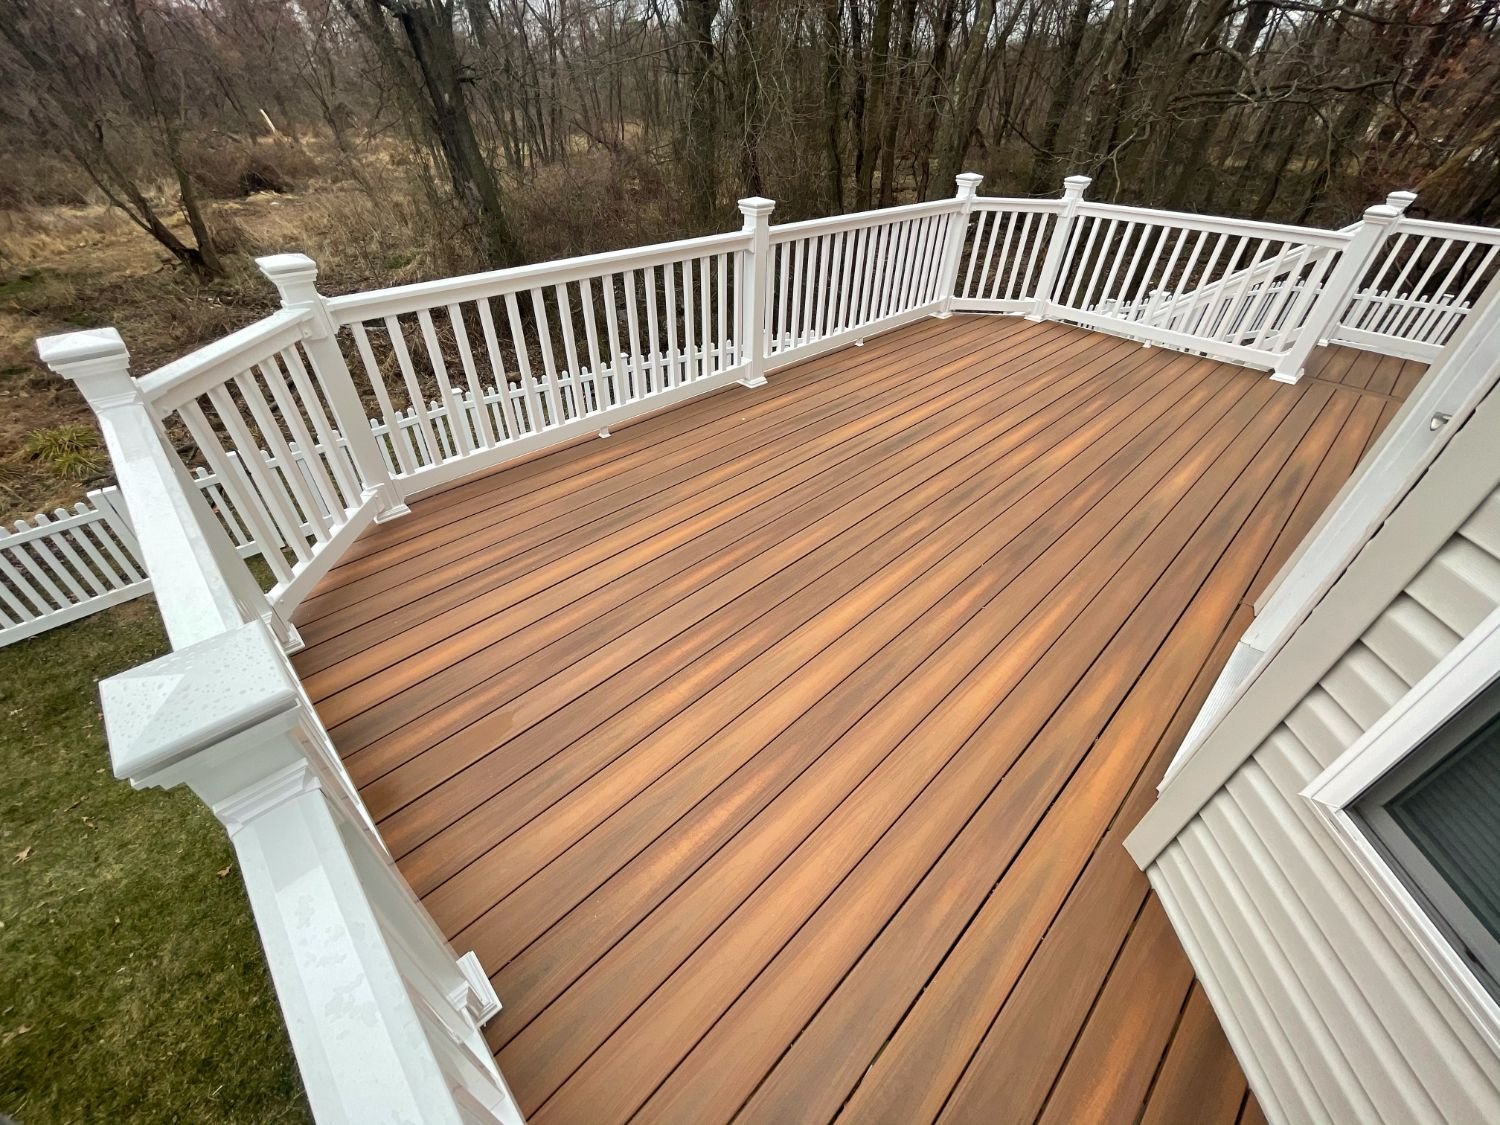 Completed Deck Projects